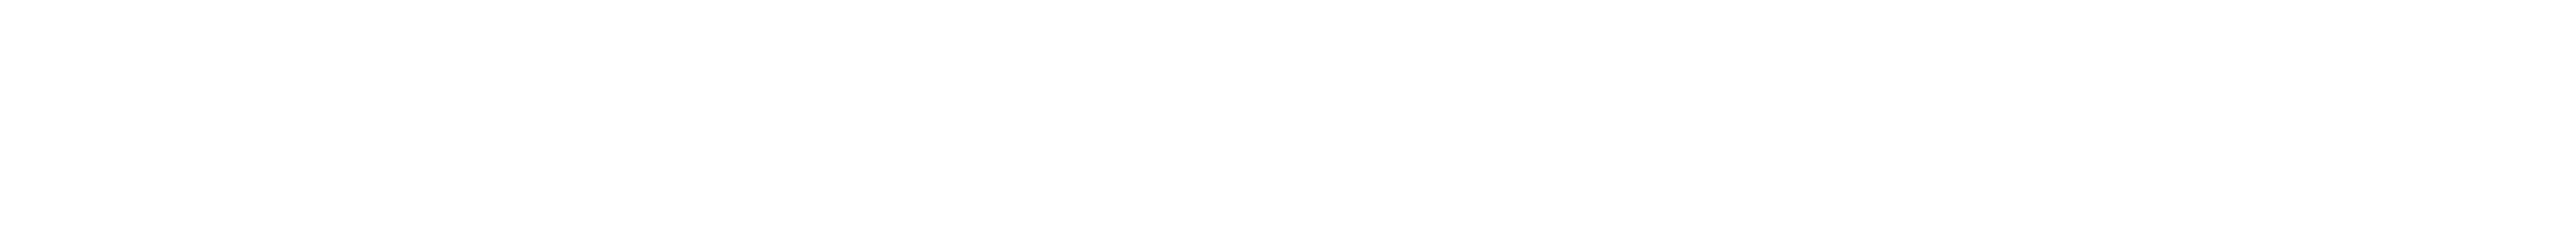 Logo for Small Screen Producer Site.